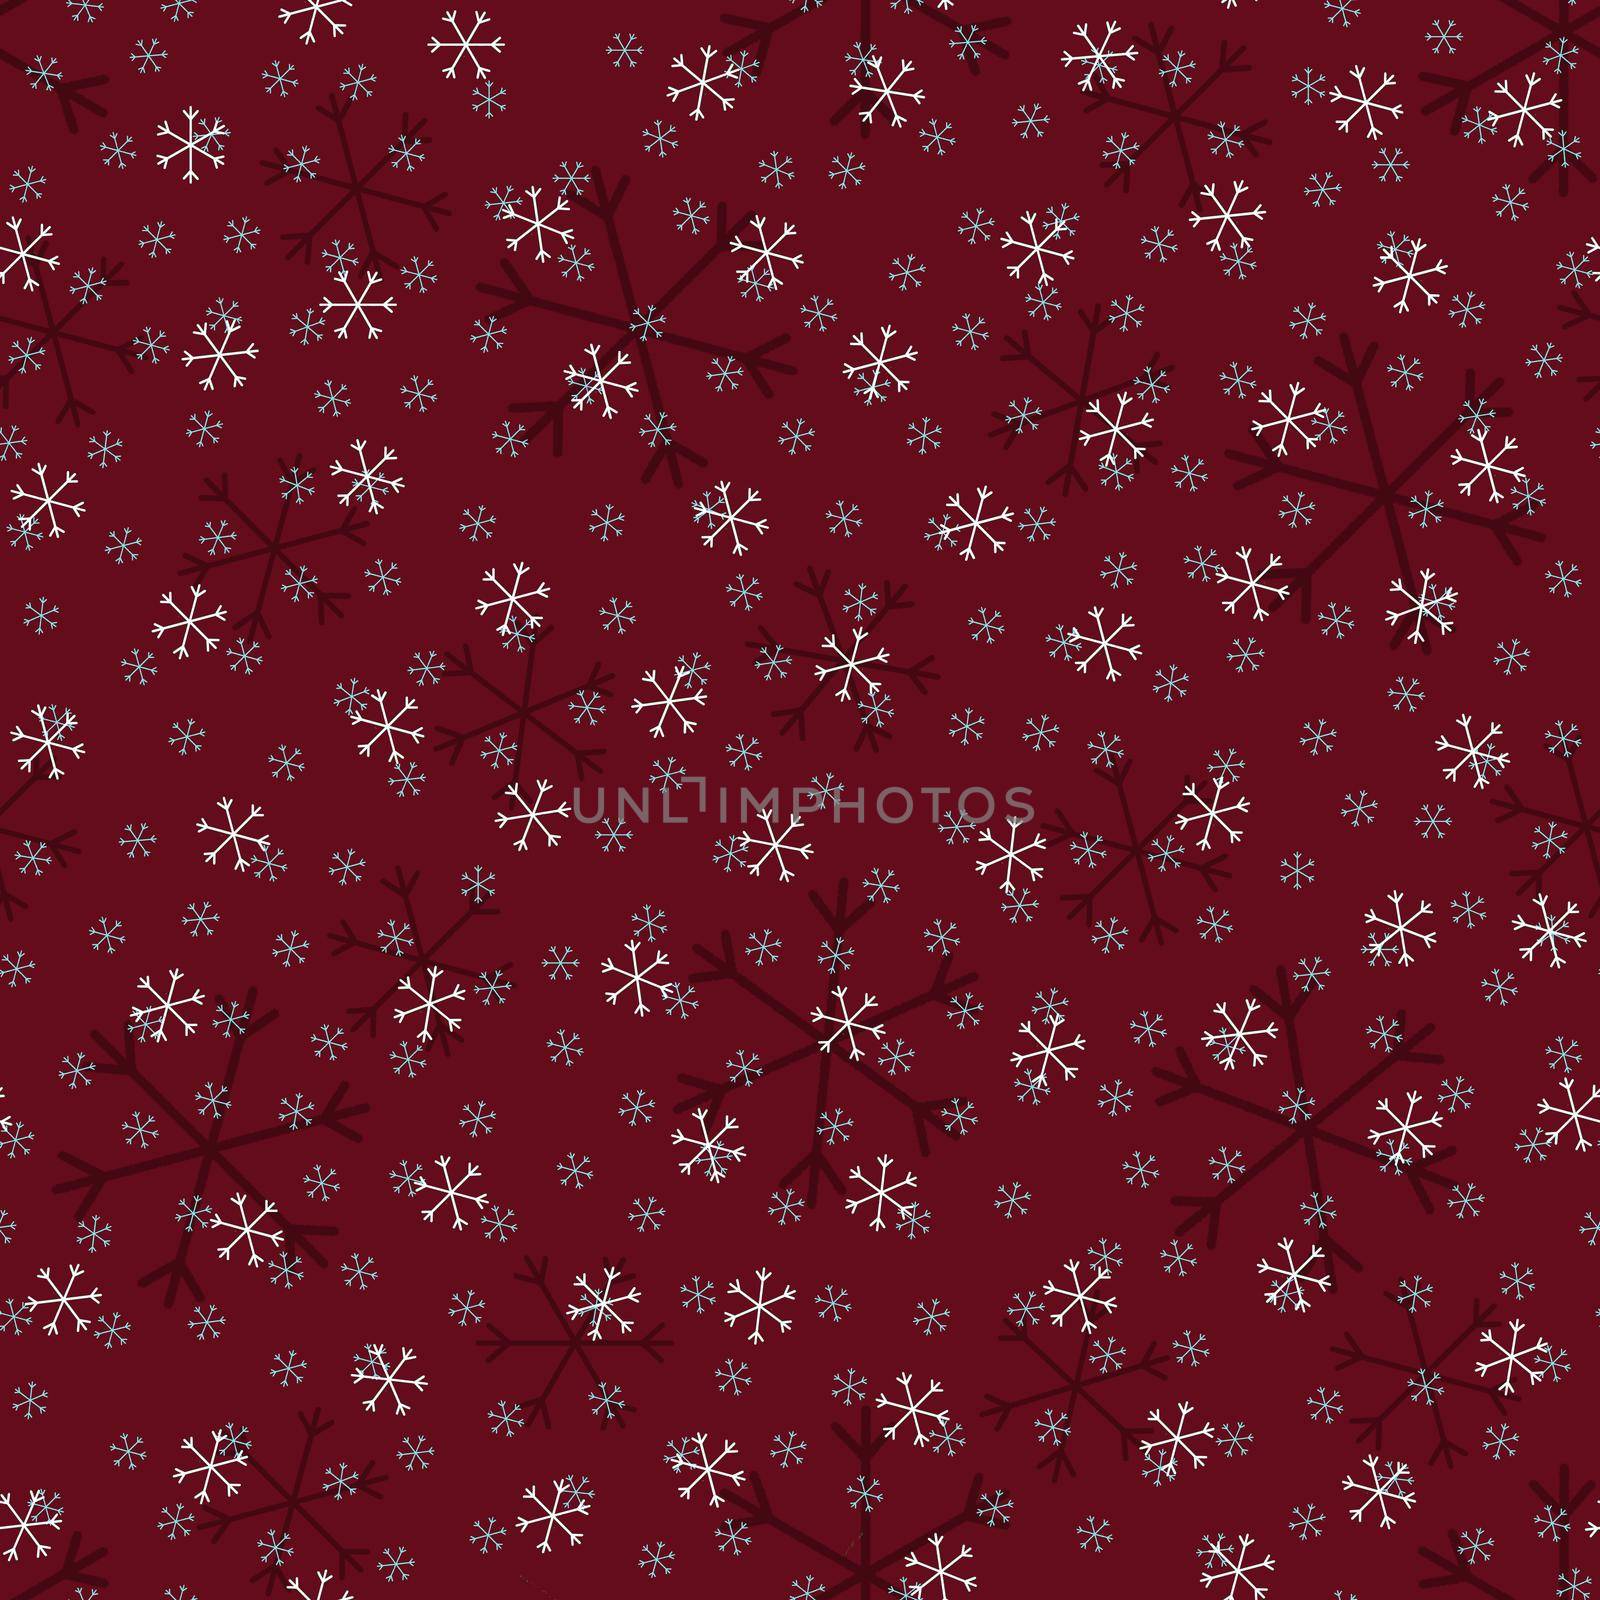 Seamless Christmas pattern doodle with hand random drawn snowflakes.Wrapping paper for presents, funny textile fabric print, design, decor, food wrap, backgrounds. new year.Raster copy.Burgundy white